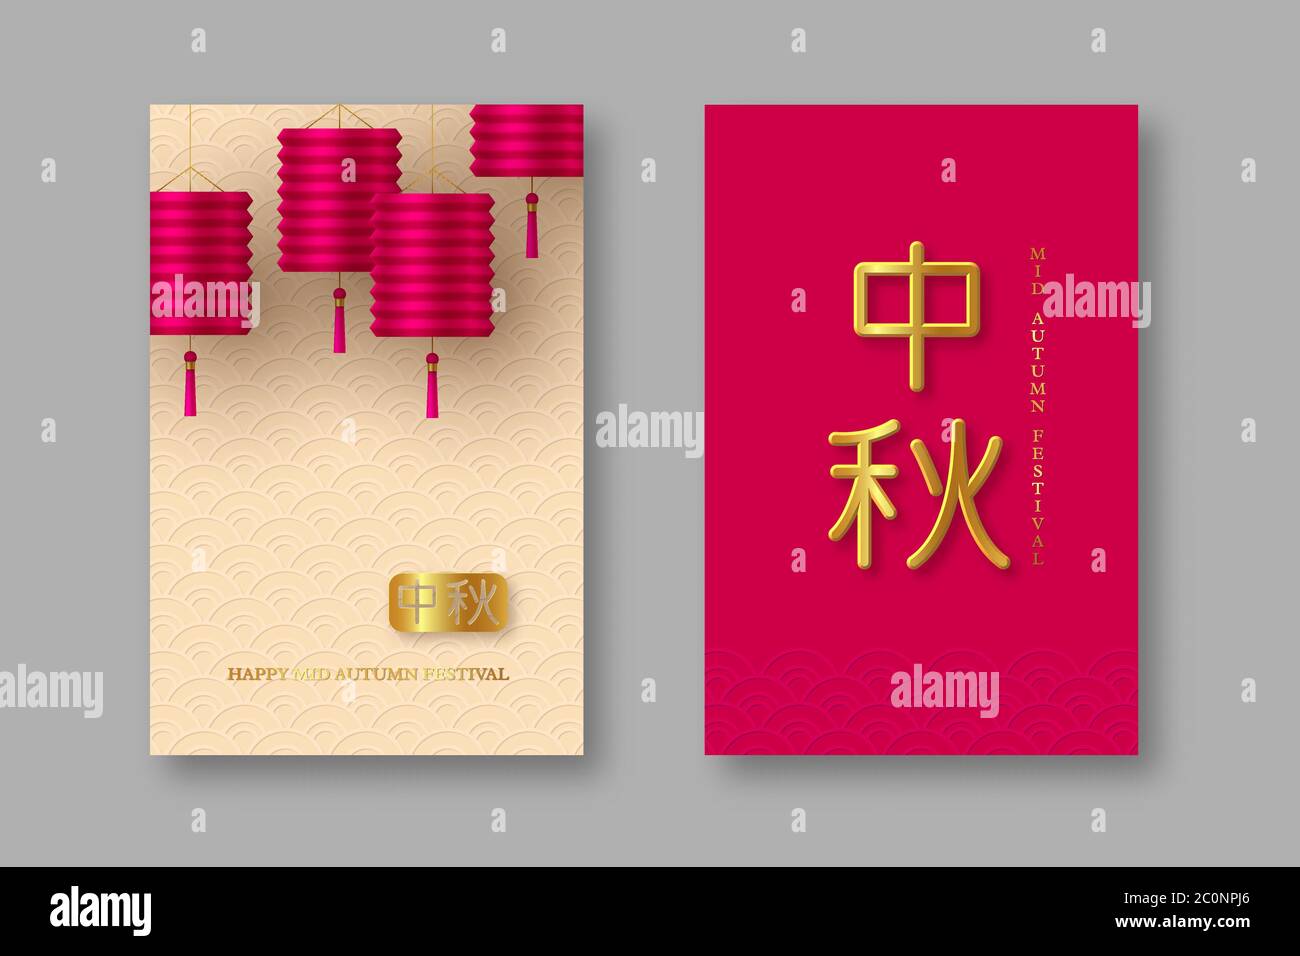 Chinese mid autumn posters. Realistic 3d pink lanterns and traditional beige pattern. Chinese golden calligraphy translation - Mid Autumn, vector Stock Vector